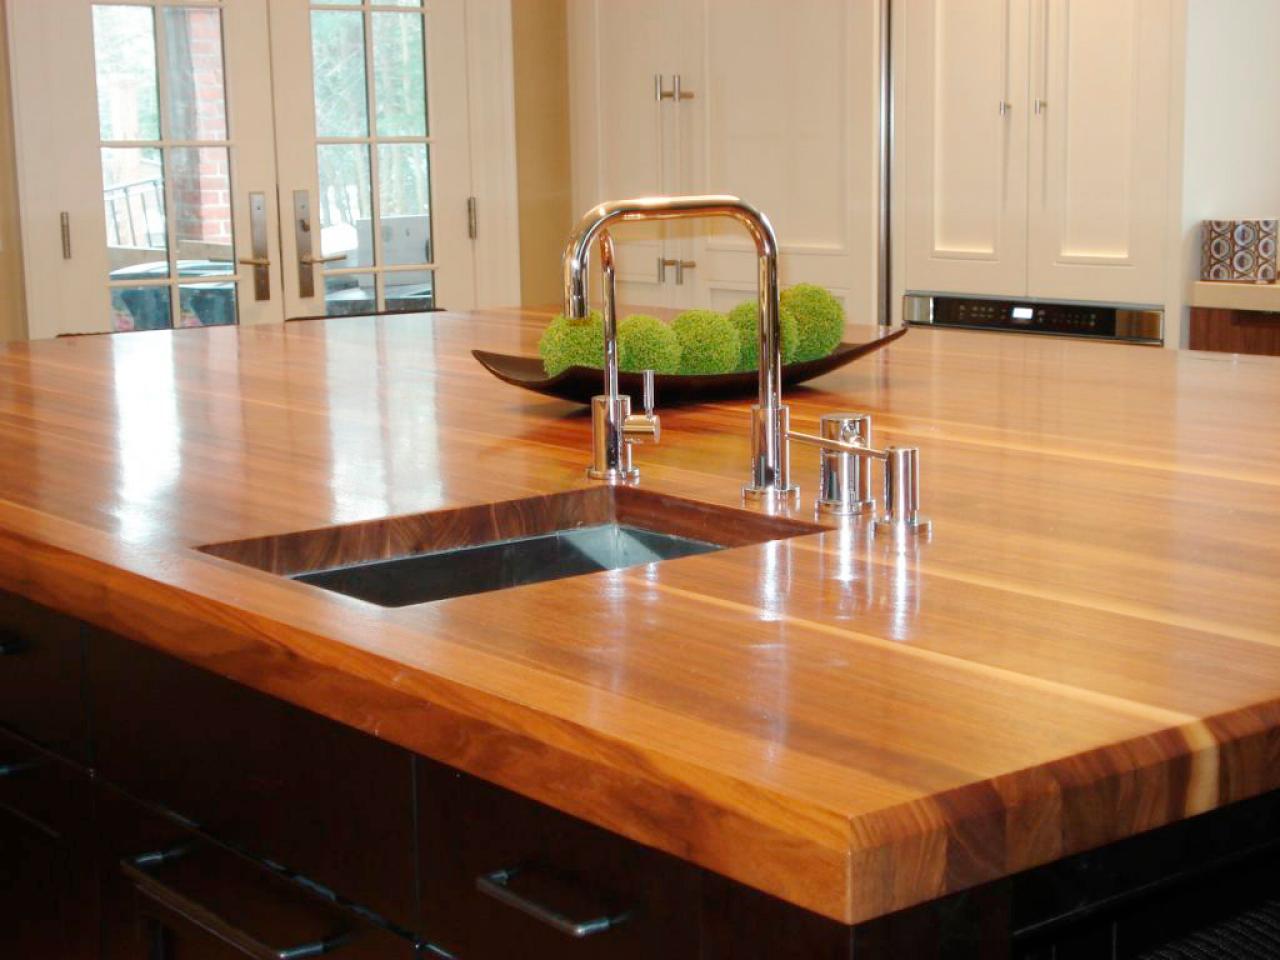 Butcher Block And Wood Countertops, How To Make A Wooden Countertop